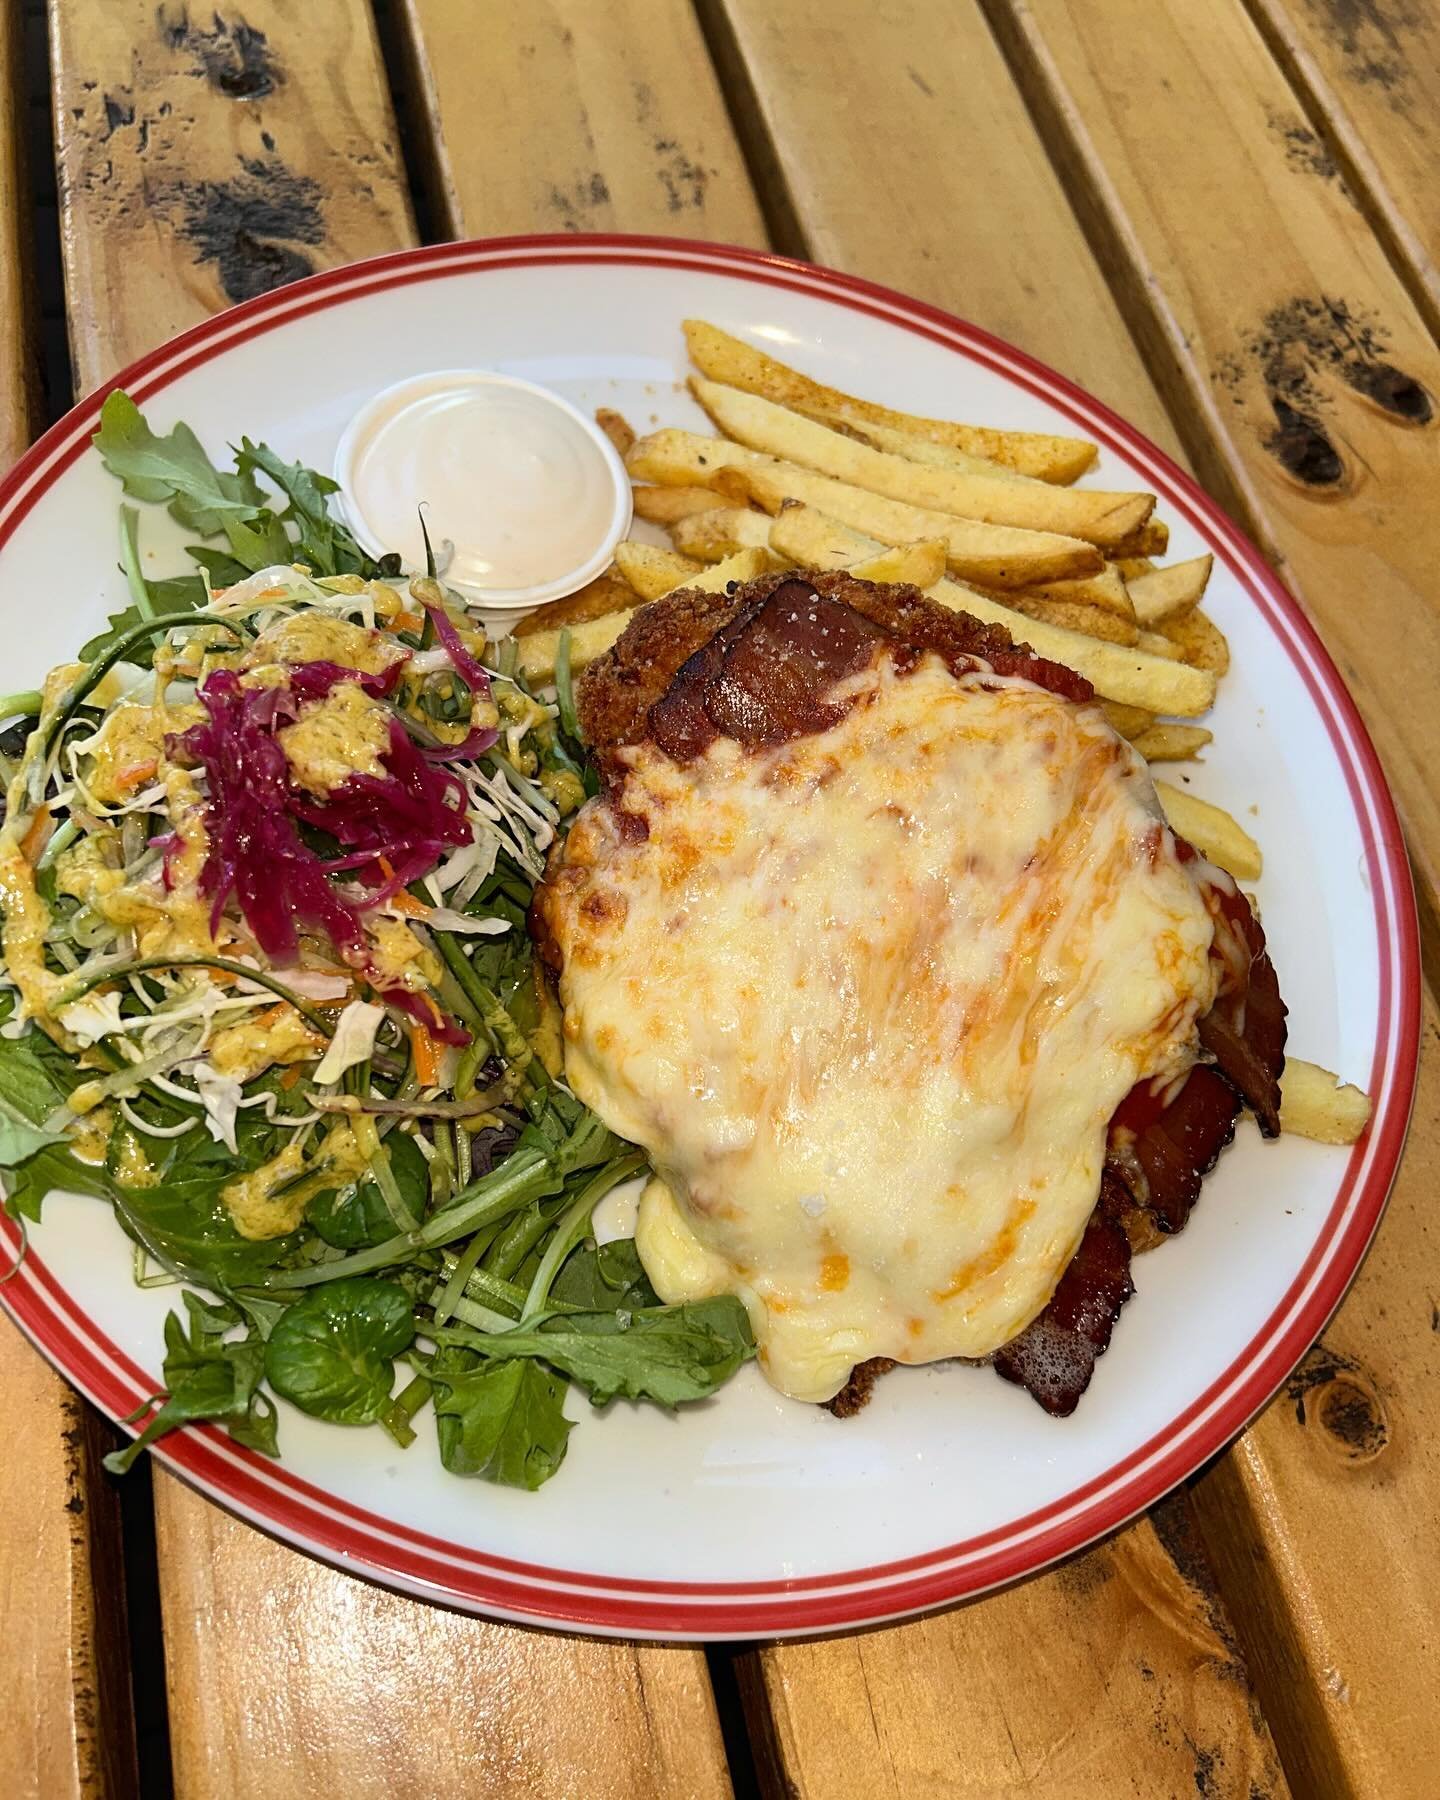 We are bringing the $20 Maple Bacon Parmi back tomorrow for 1 more week! 🤤

We sold out in less than 2 hours last week! (sorry if you missed out 🥹)

As always beer and bites from 3pm while full kitchen opens at 5pm. See you at the Brewpub x